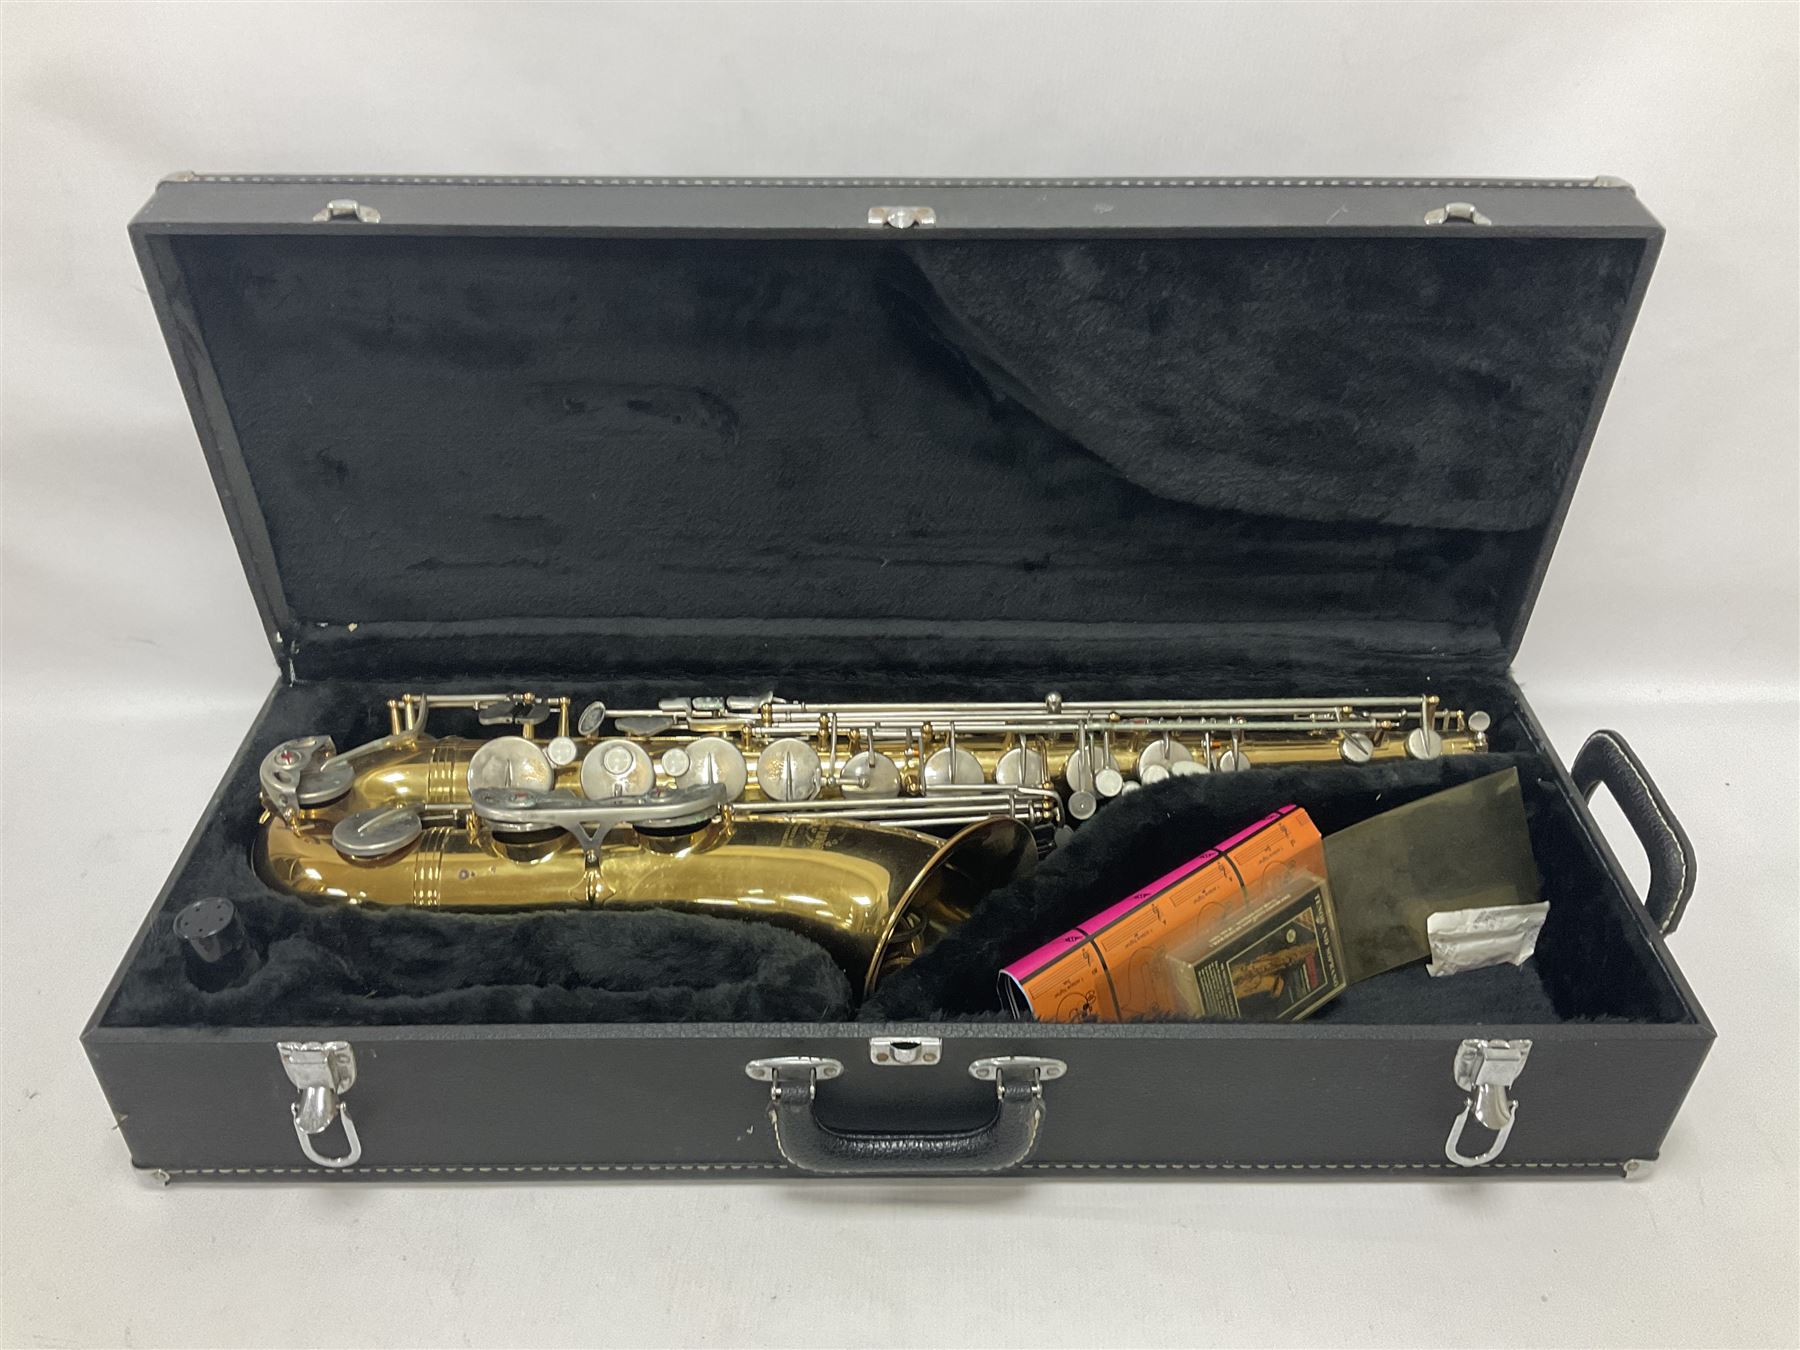 Earlham Tenor saxophone with mouthpiece in a fitted velvet lined hard case - Image 3 of 26